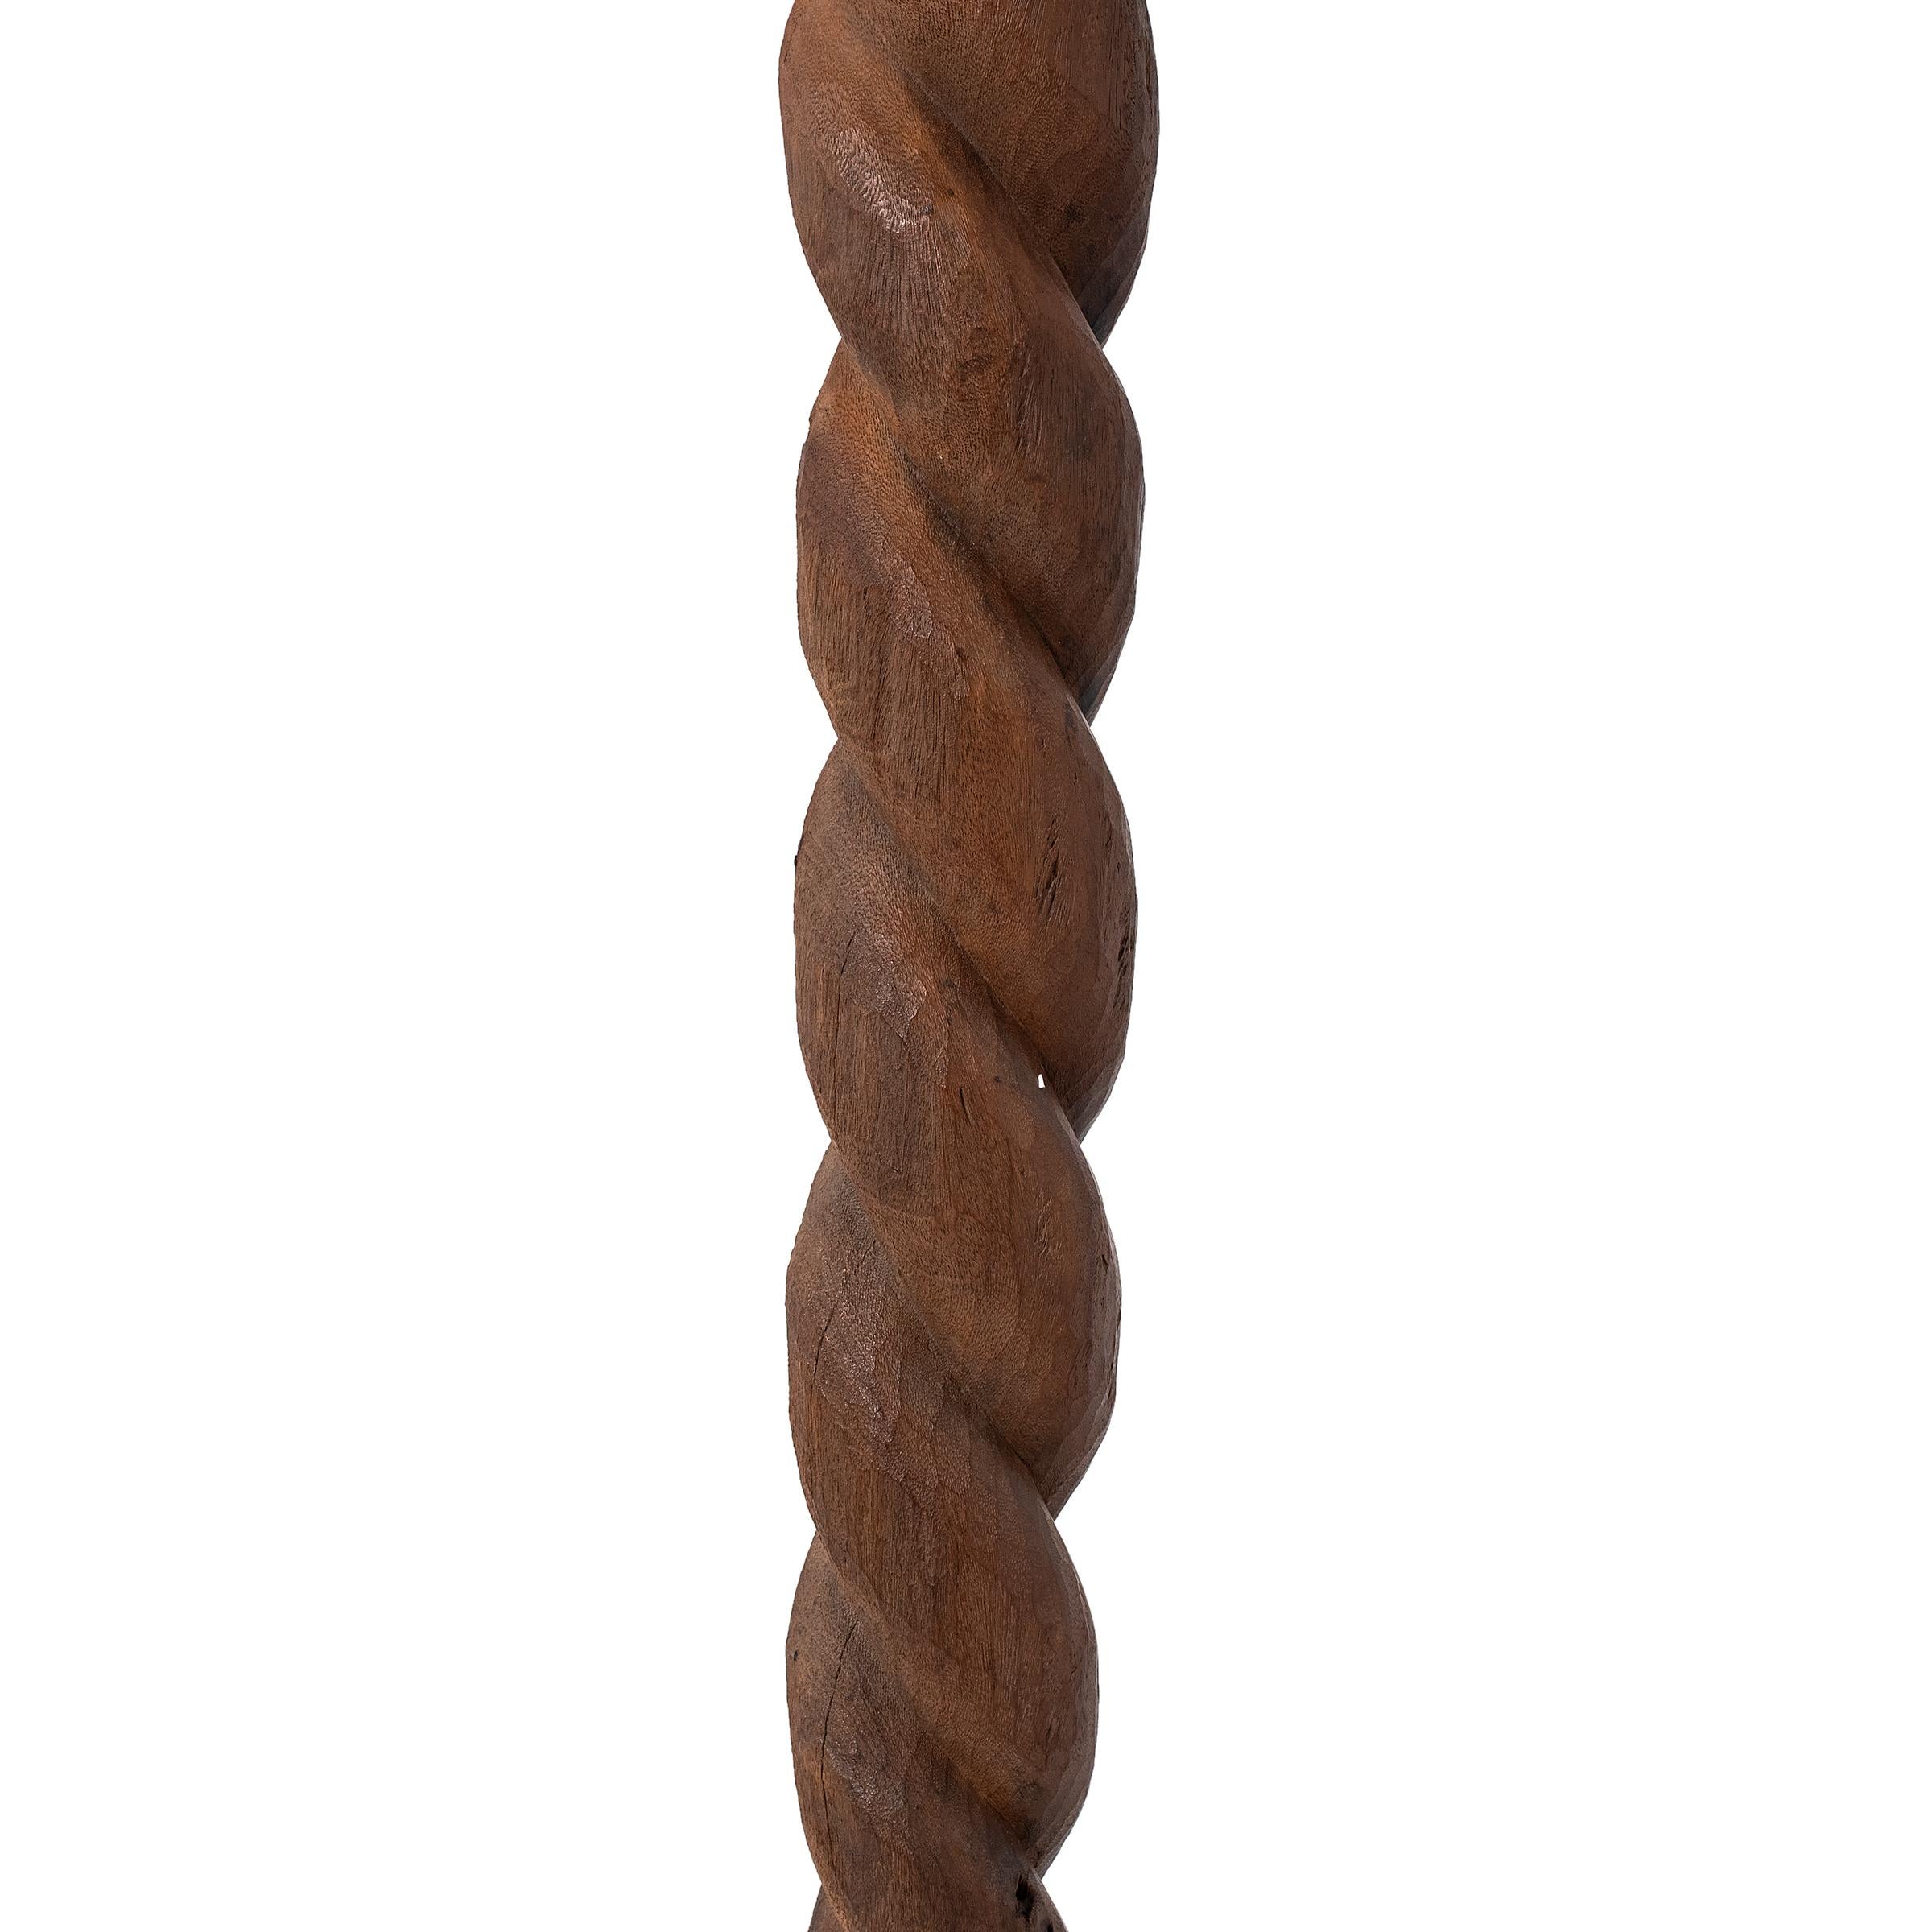 Hand-carved with an abstract design, this tall wooden post is an architectural support beam attributed to the Nupe people of central Nigeria. Like much of Nupe art, support posts are typically carved with simple geometric forms, rather than